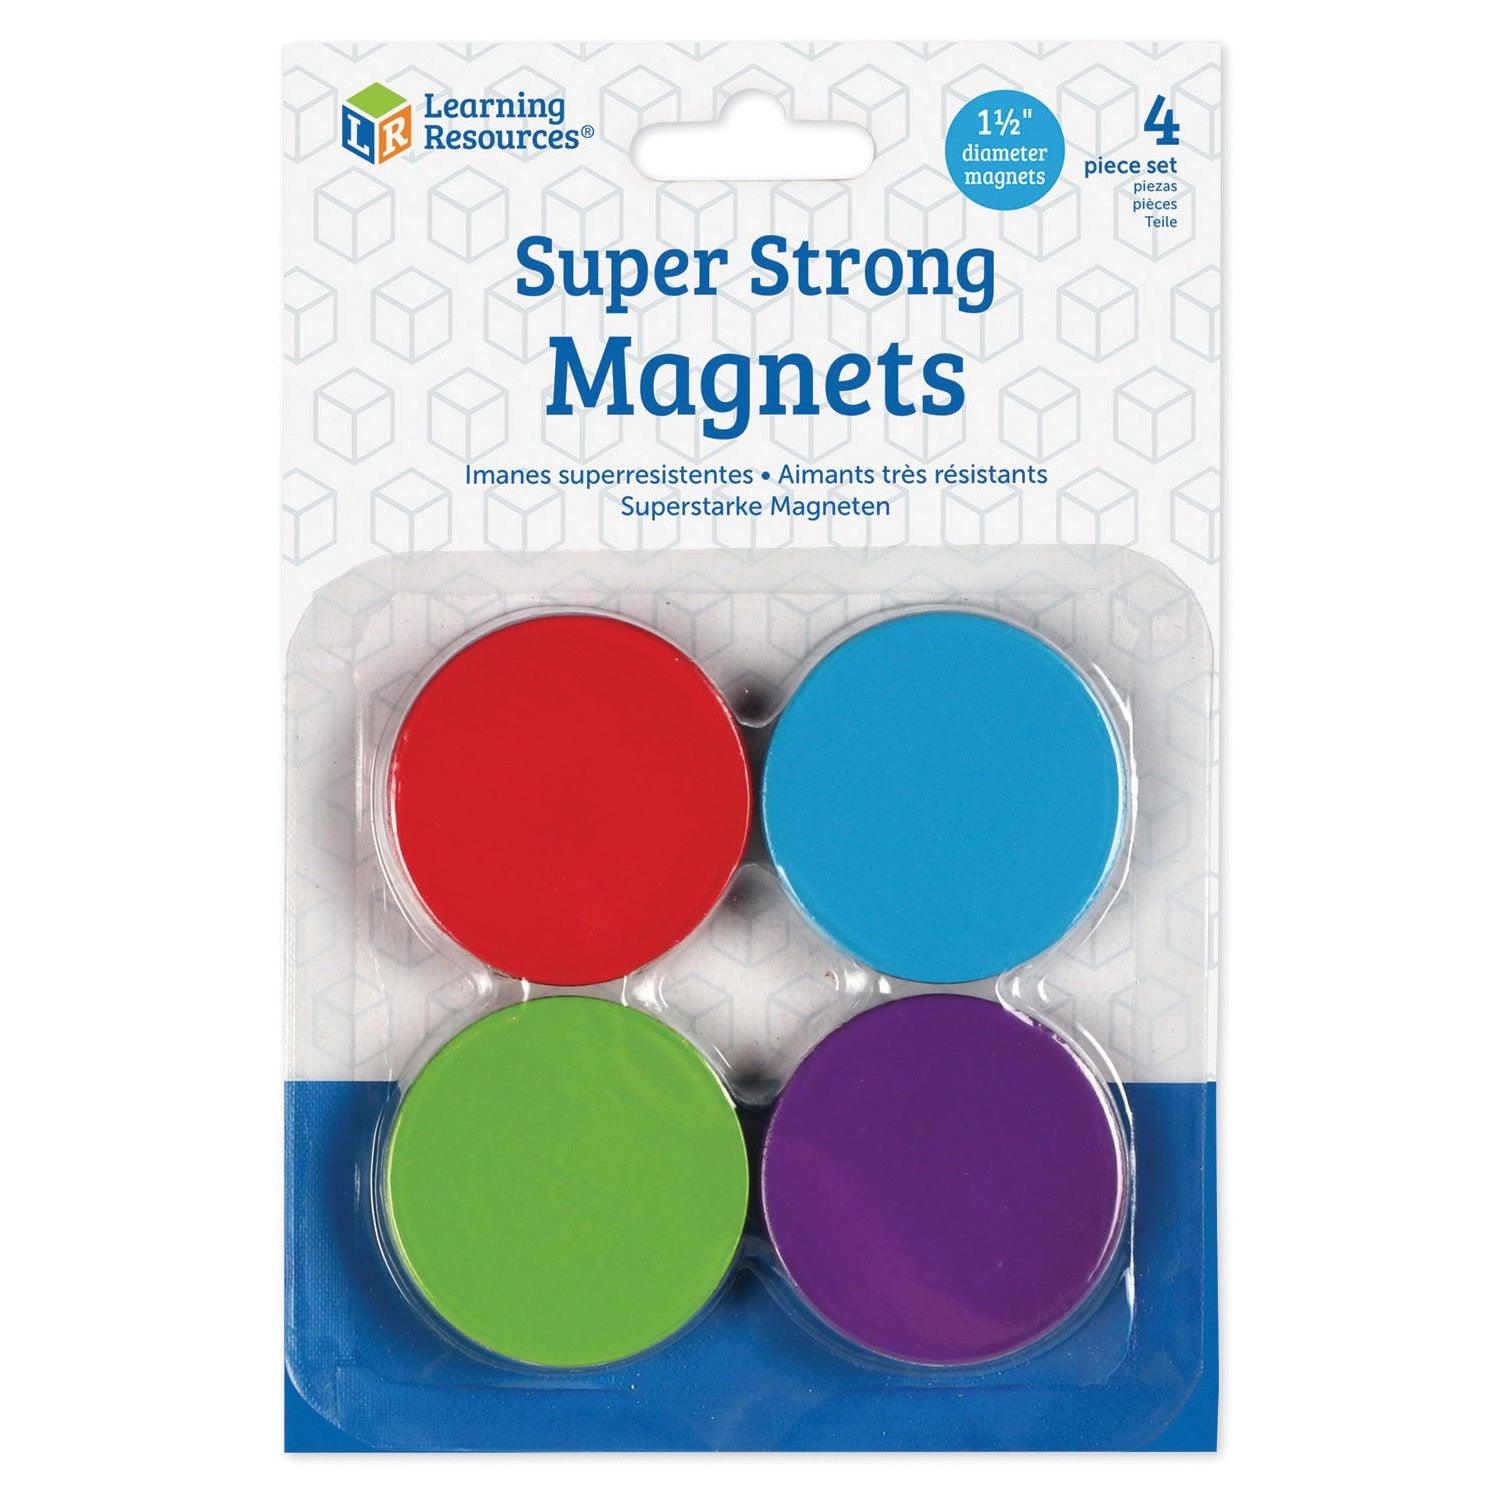 Super Strong Magnets - Loomini